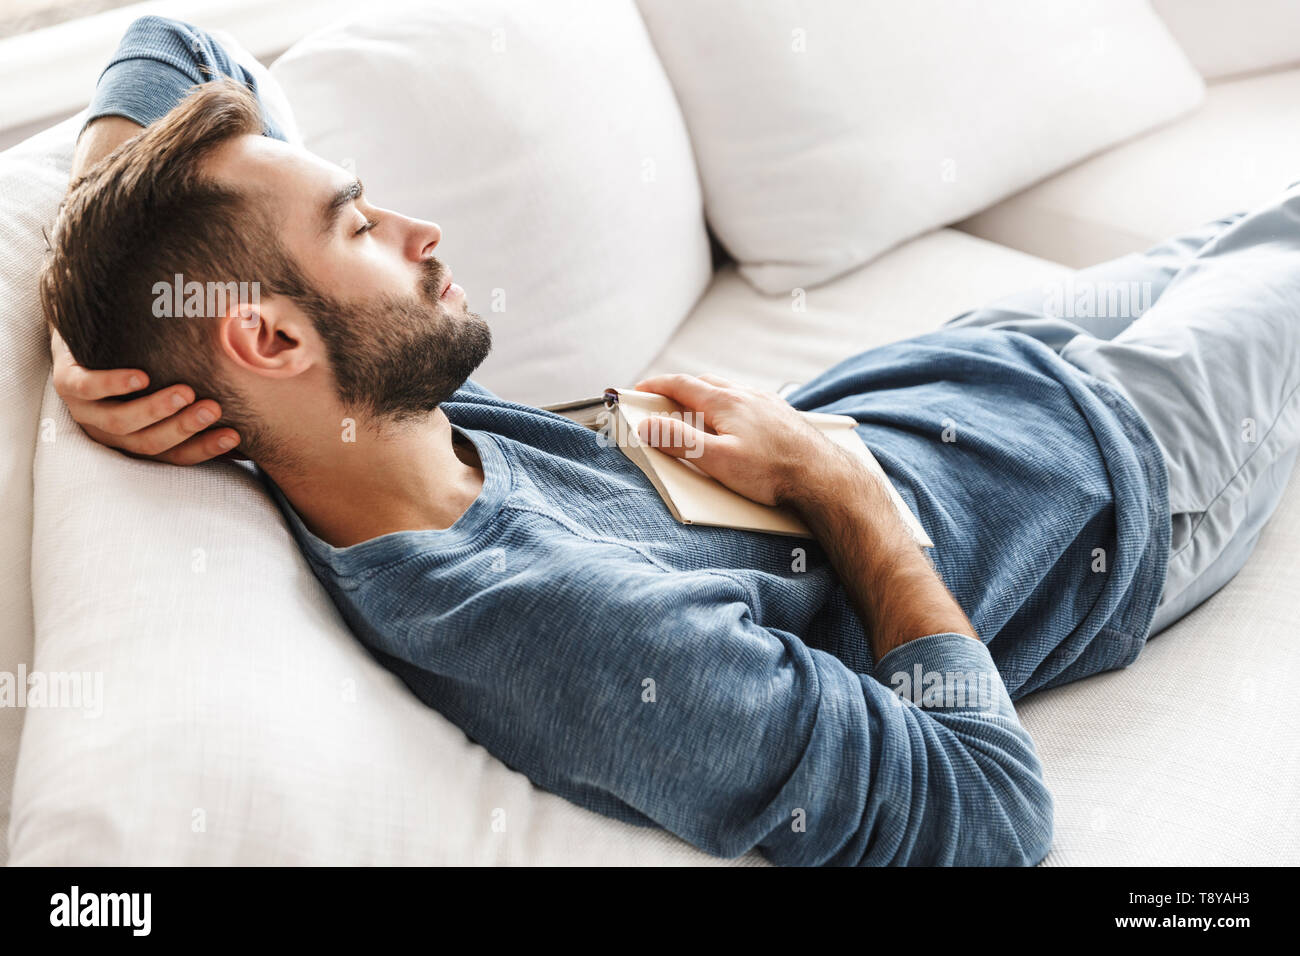 Attractive young man relaxing on a couch at home, sleeping Stock Photo